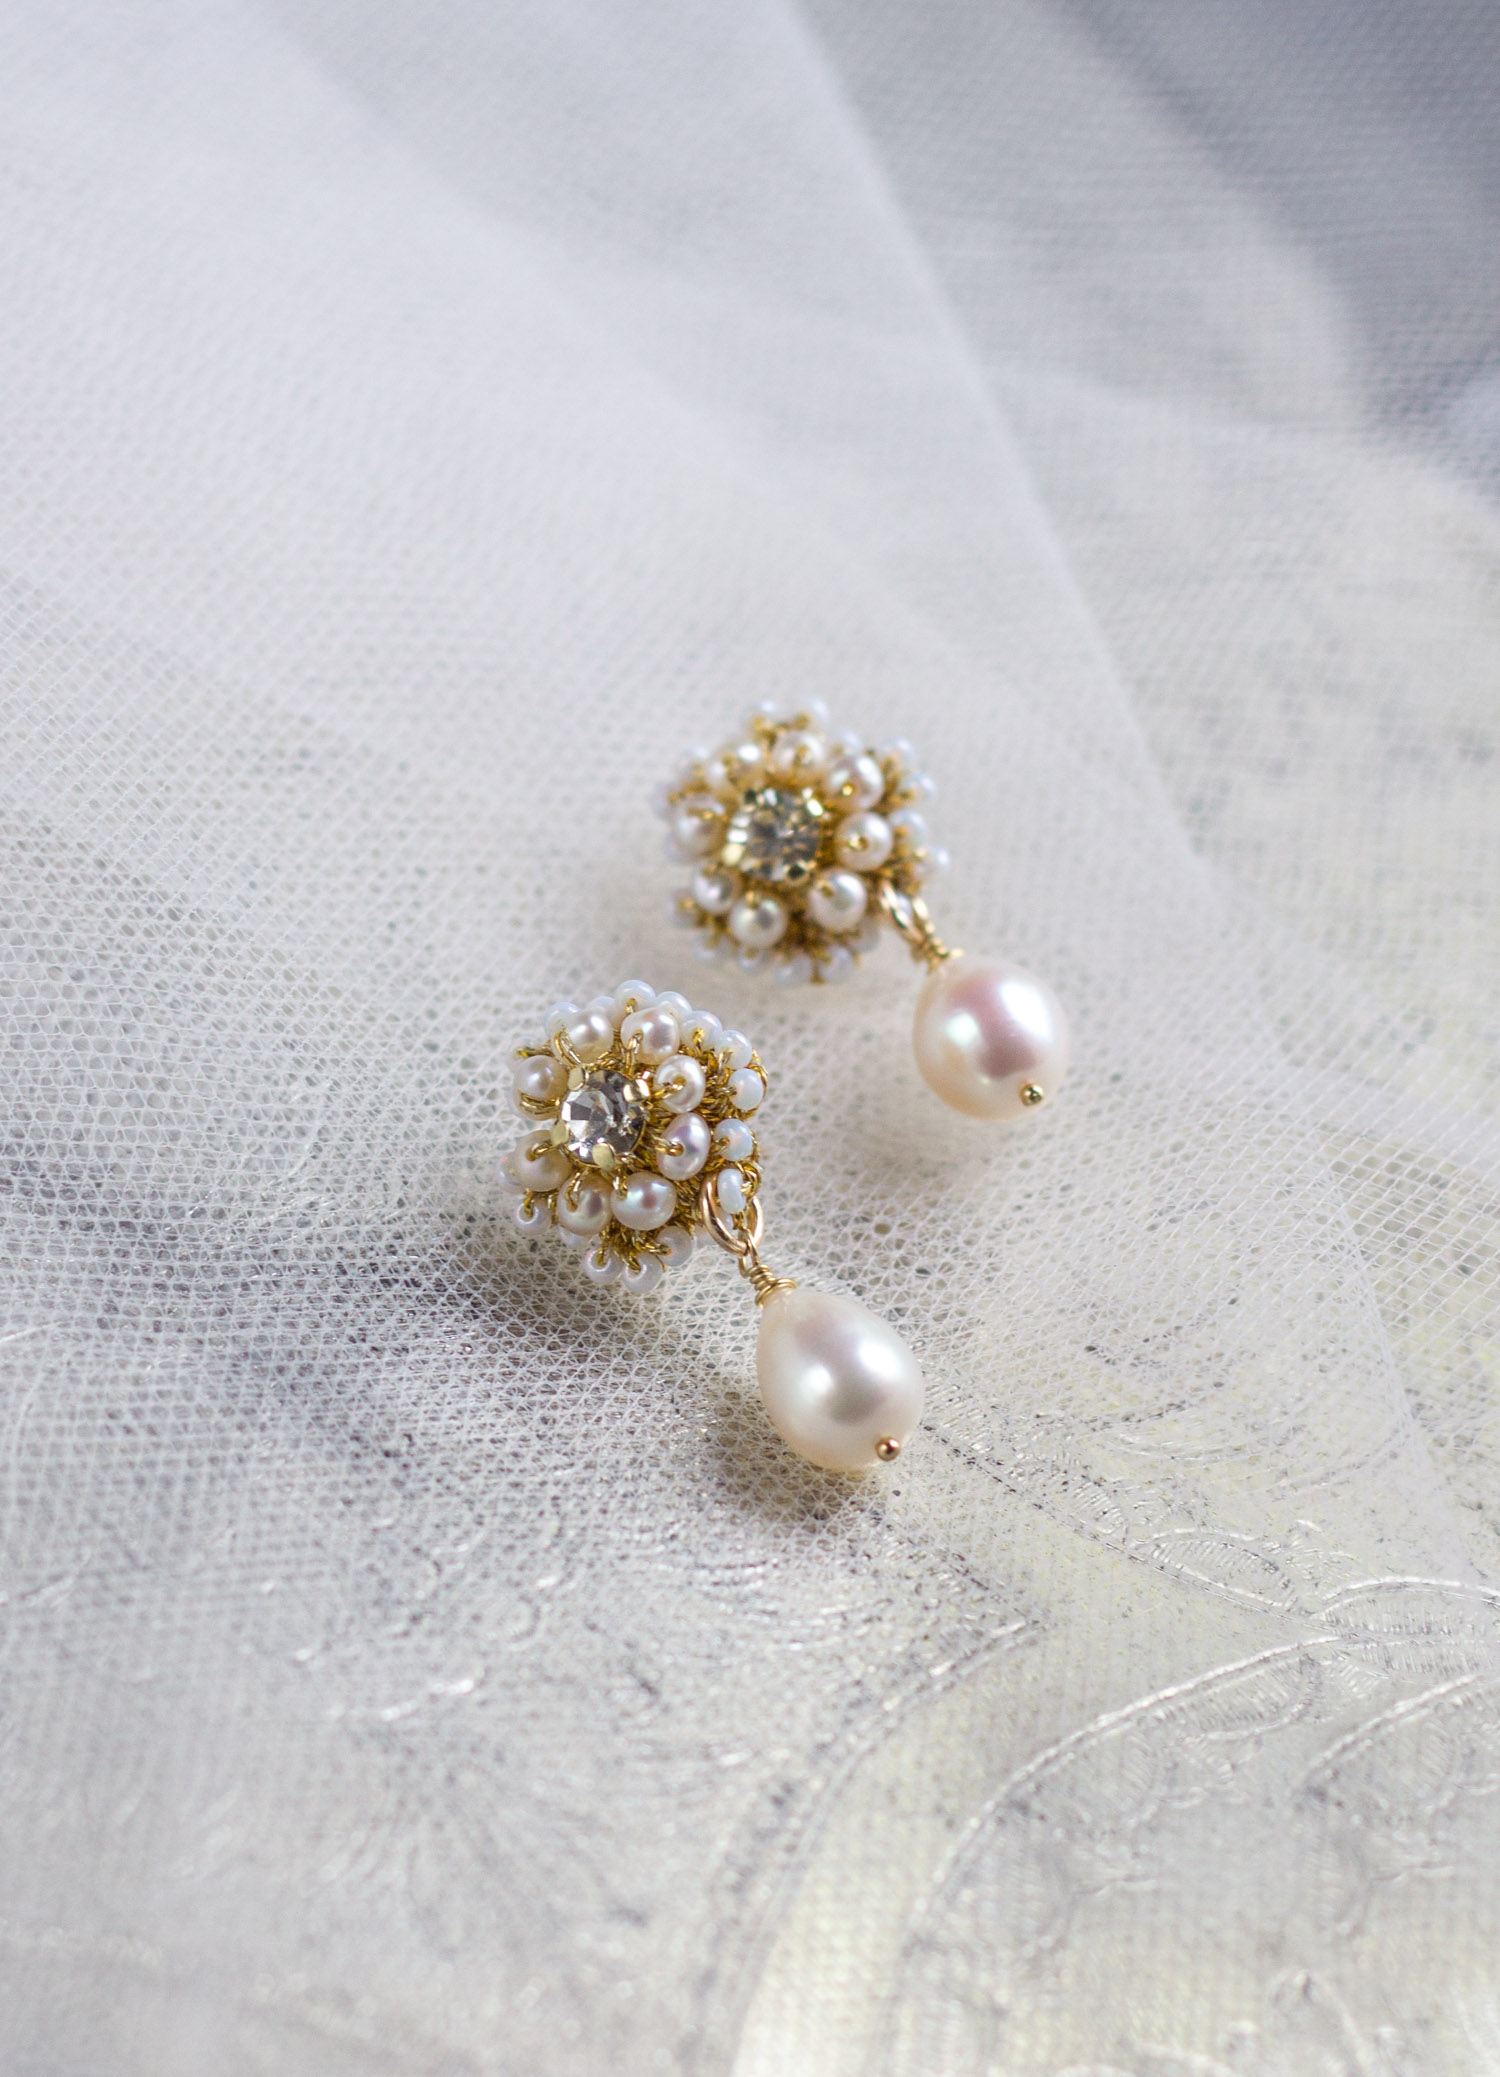 golden earrings with pearl and rhinestones stud earrings vintage jewelry gift for women